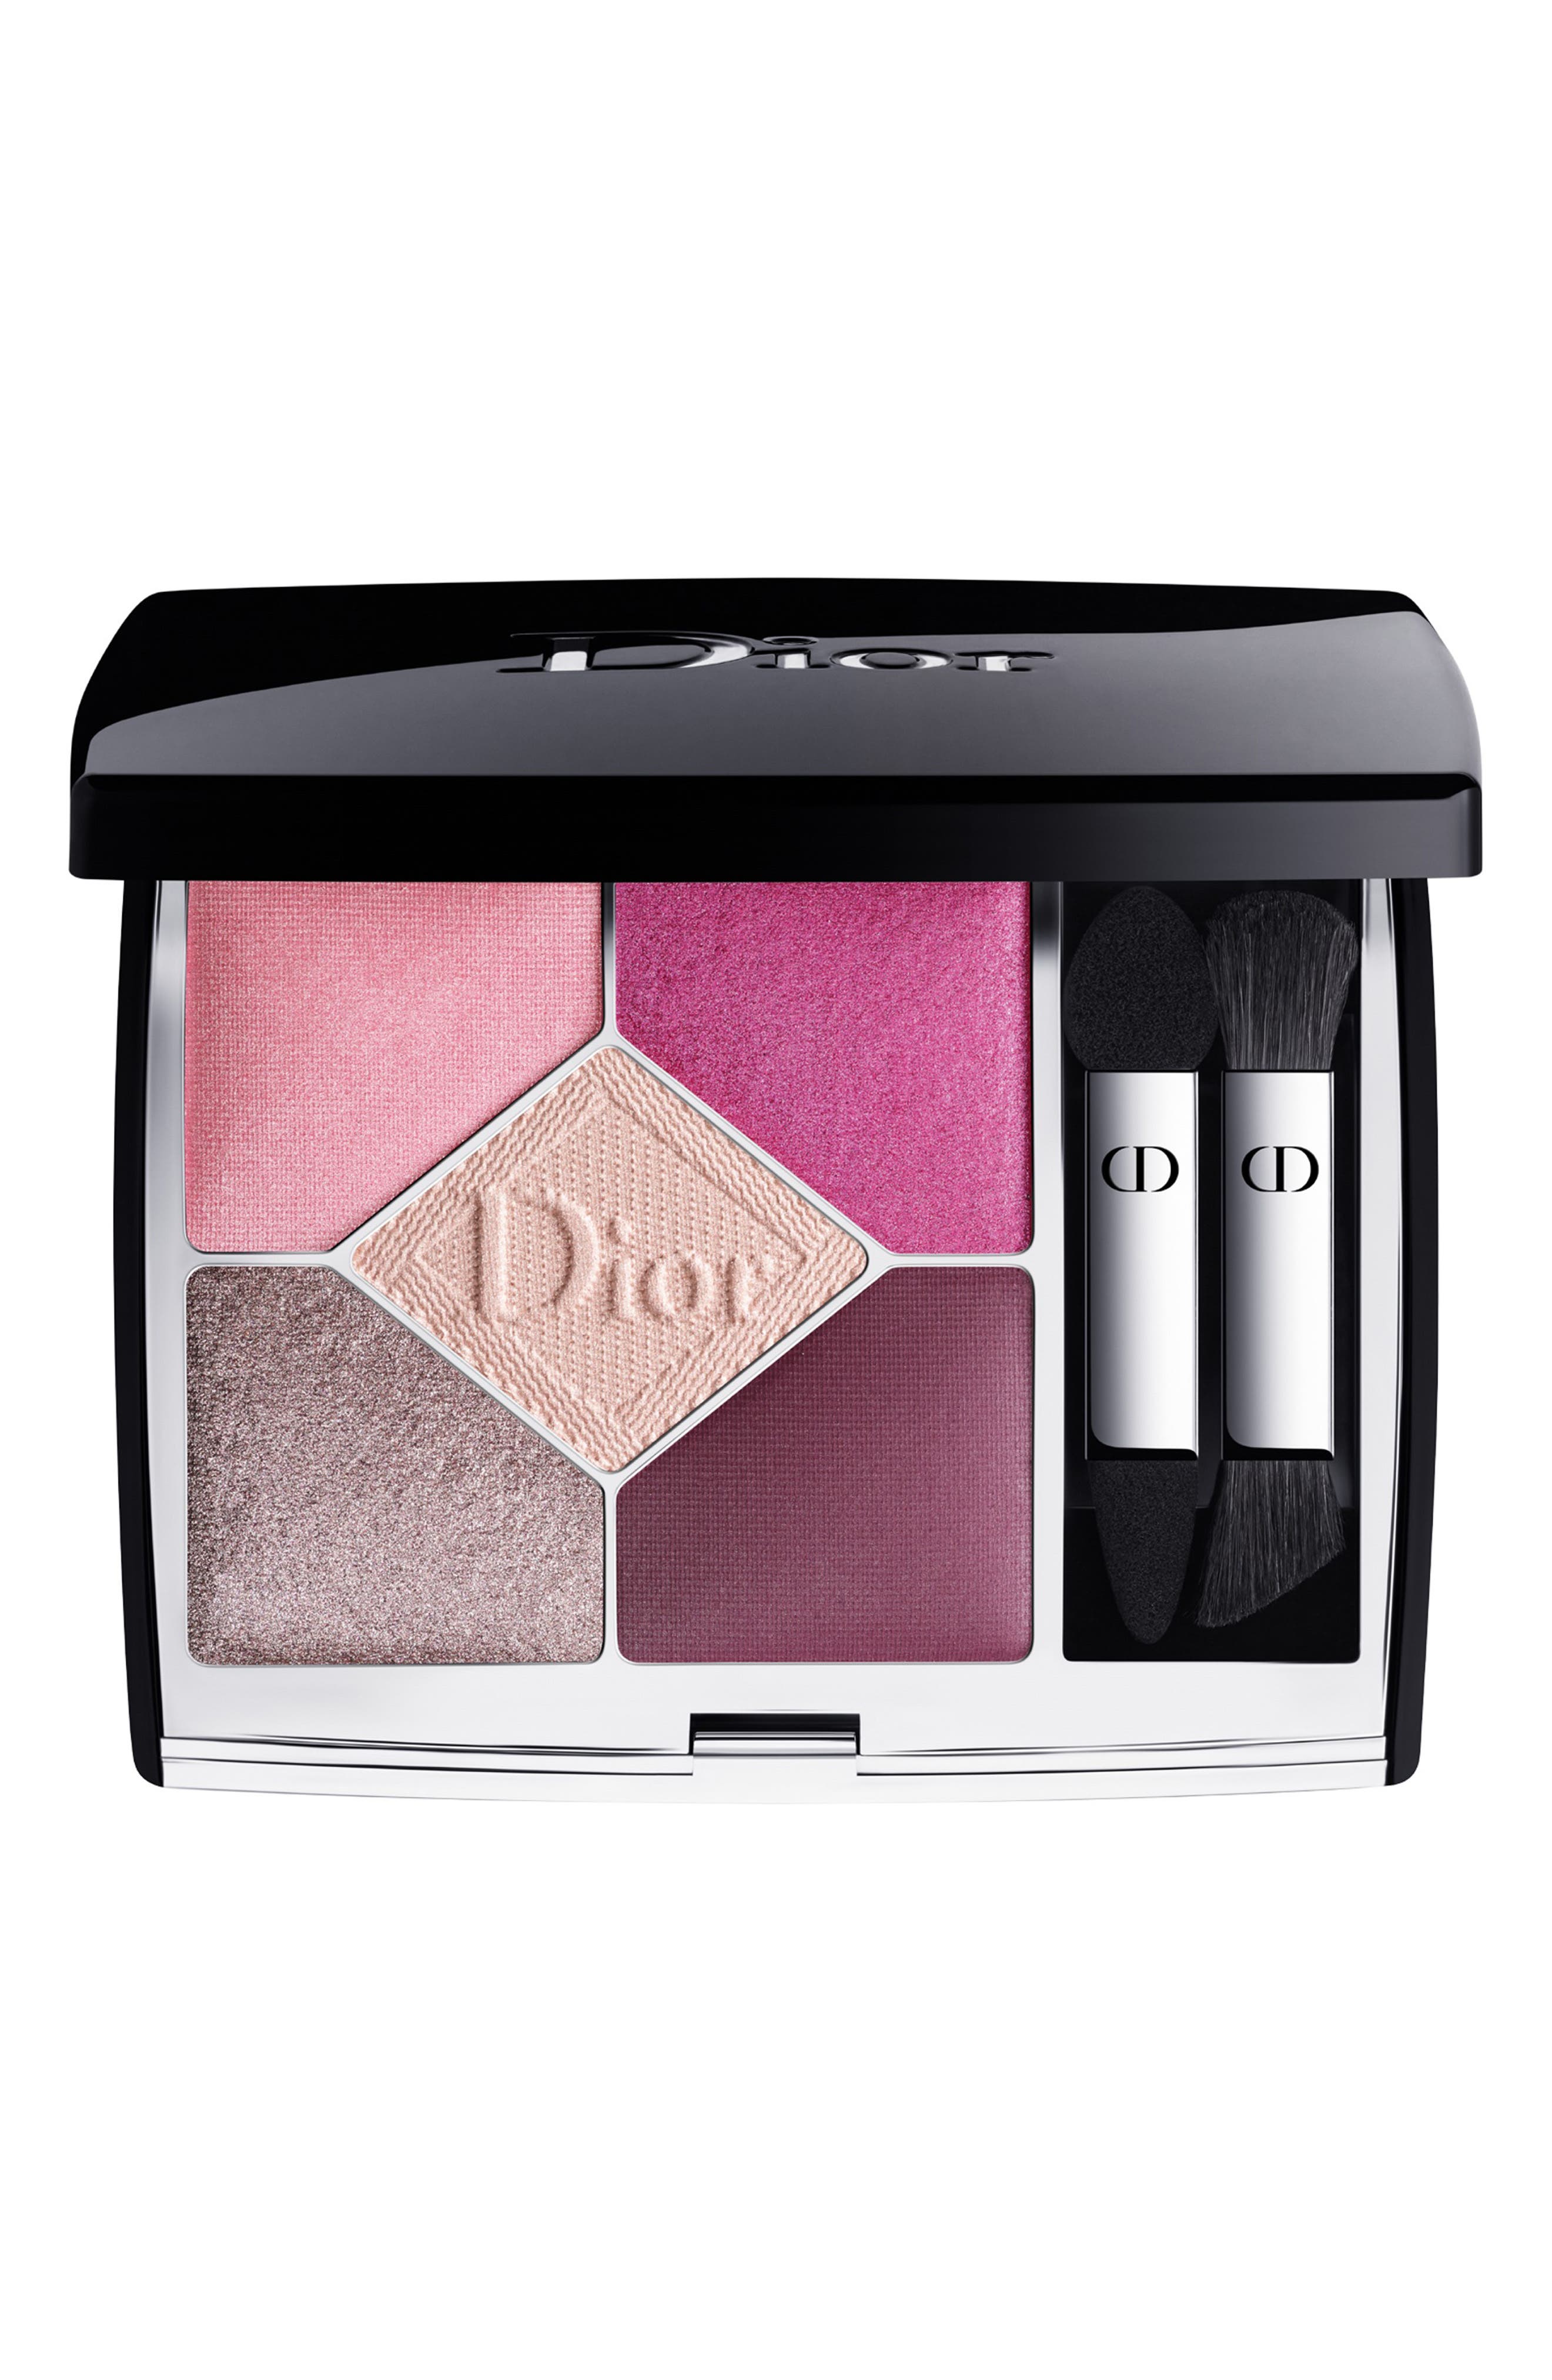 Dior 5 Couleurs Couture Eyeshadow Palette in 859 Pink Corolle